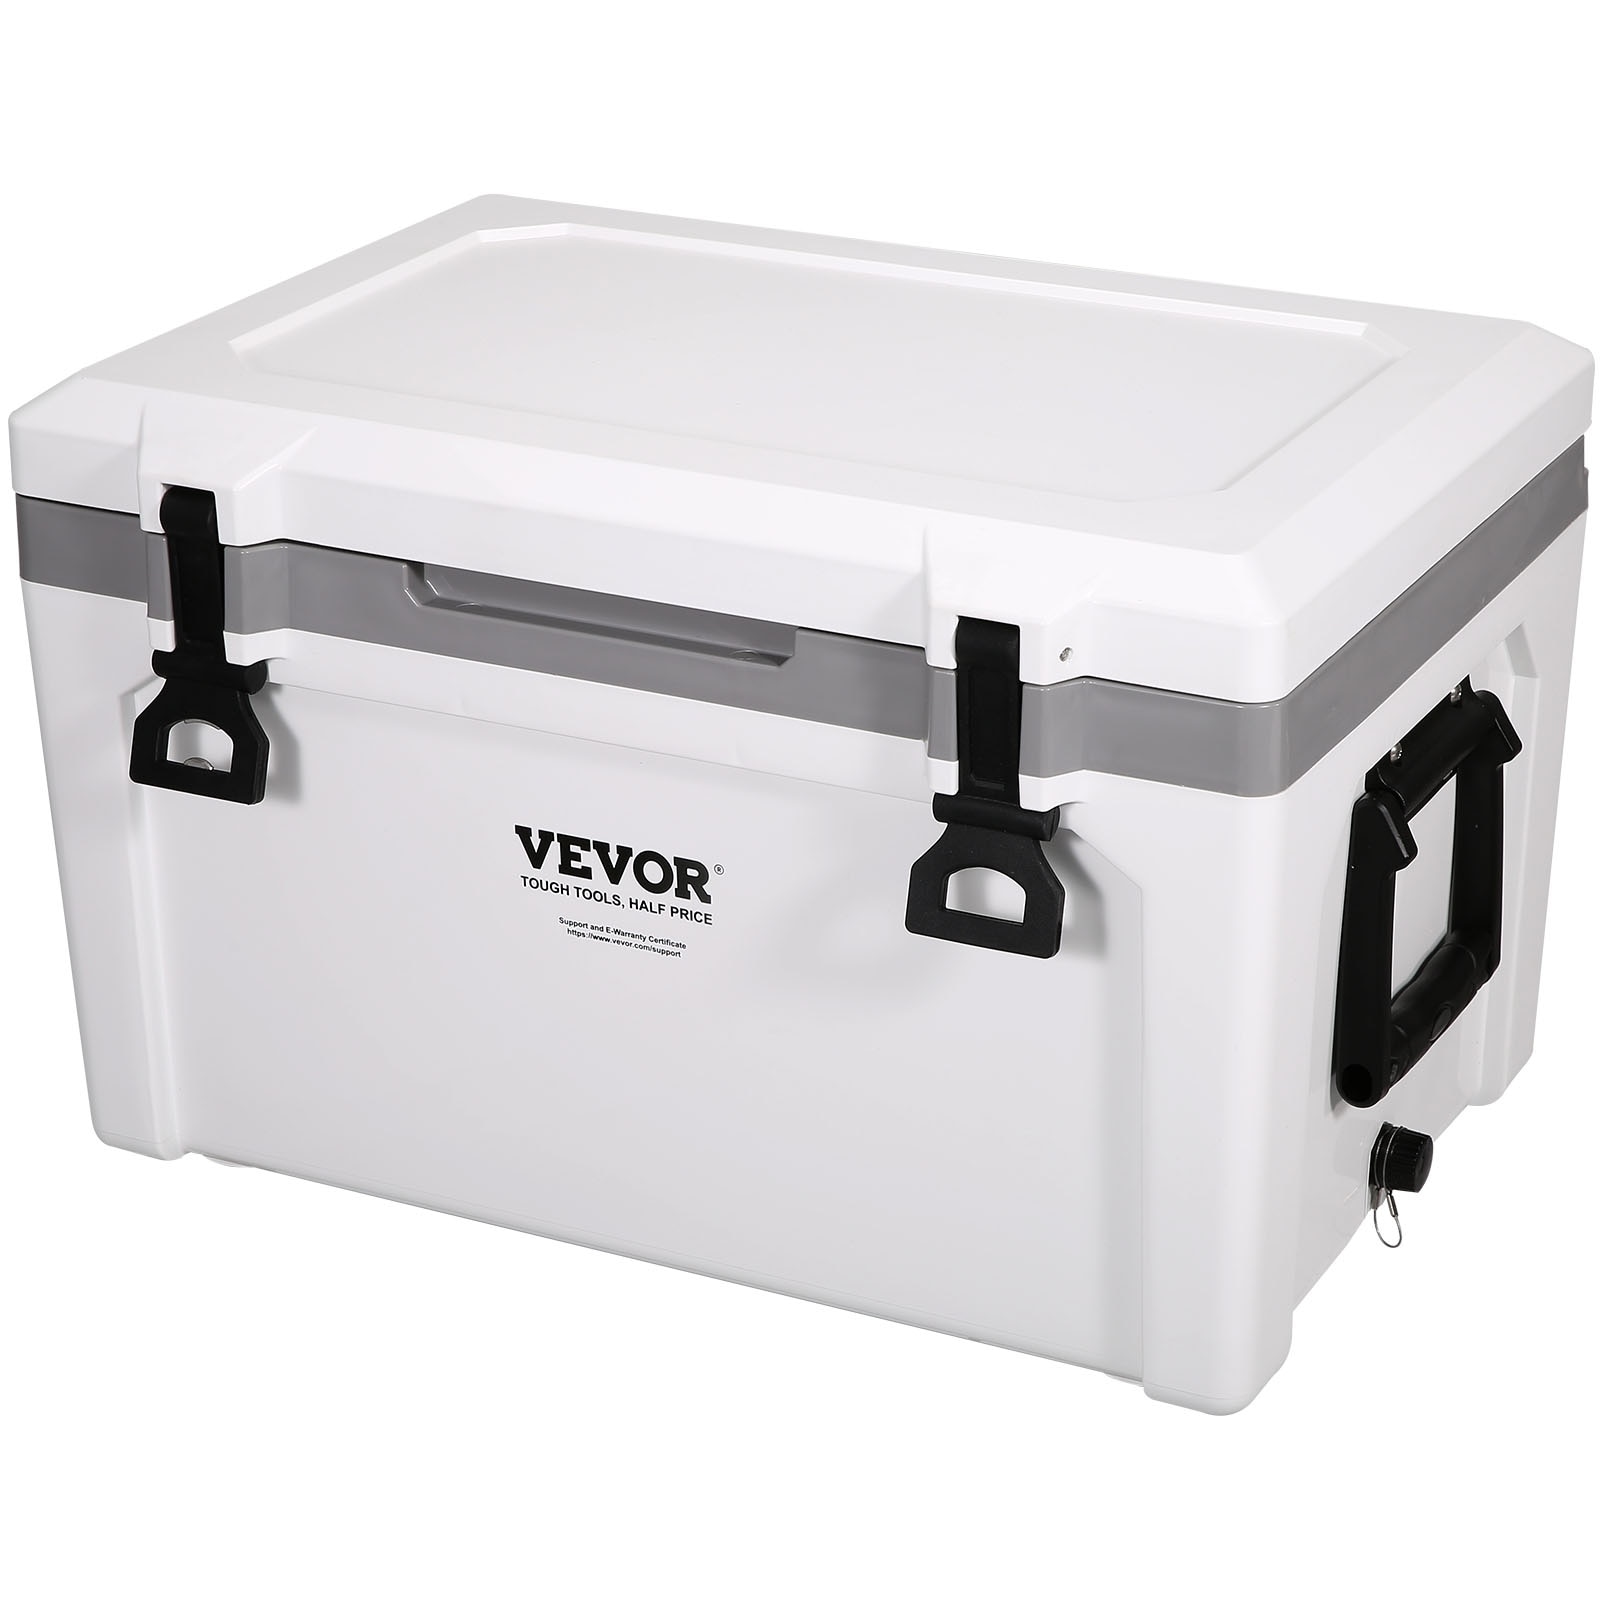 VEVOR Insulated Portable Cooler 25-65 qt Holds 25 to 65 Cans Ice